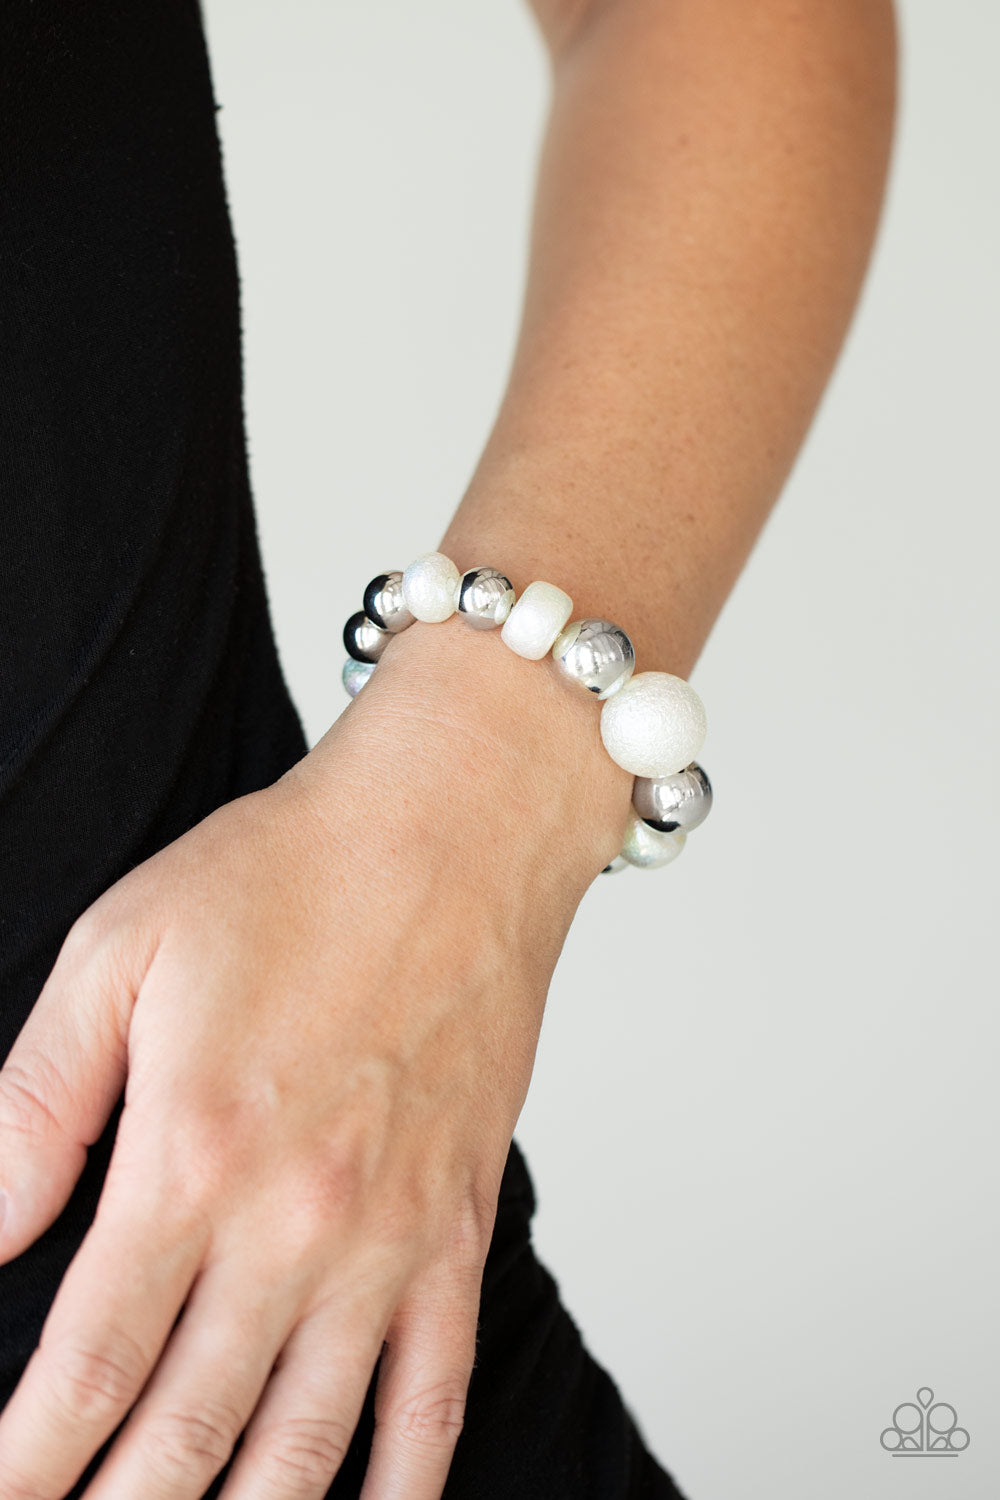 Starstruck Shimmer White Bracelet- Paparazzi Accessories.  Brushed in a stellar iridescence, hammered pearly beads and classic silver beads gradually increase in size as they slide along a stretchy band around the wrist for a glamorous look. All Paparazzi Accessories are lead free and nickel free!  Sold as one individual bracelet.  Get The Complete Look! Necklace: "Twinkle Twinkle, I'm The Star - White" (Sold Separately)